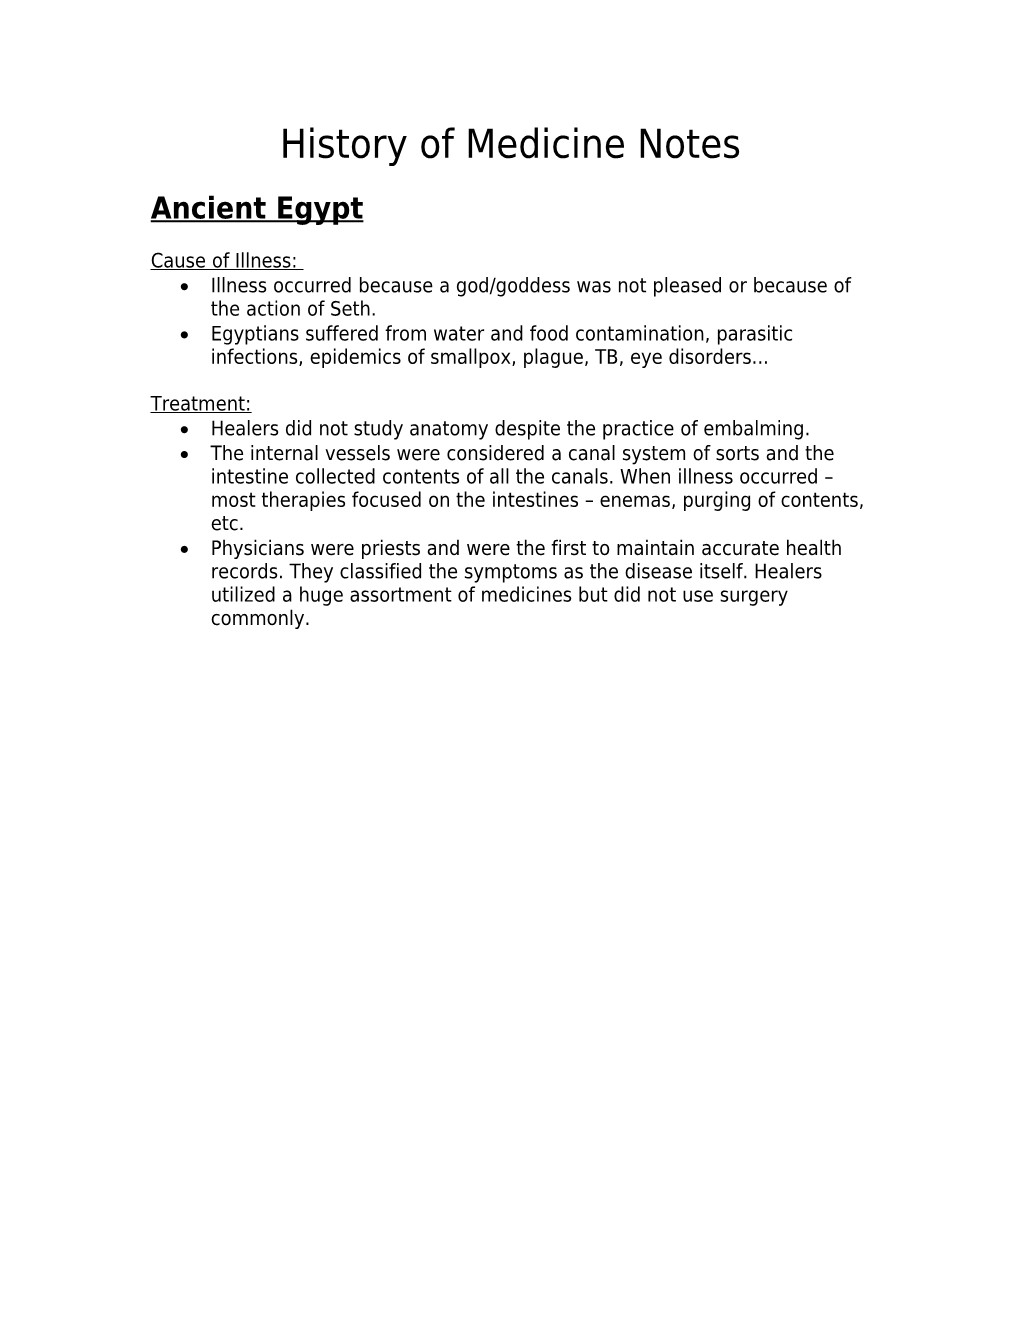 Ancient Egypt: Time Period 3000-1000 BC